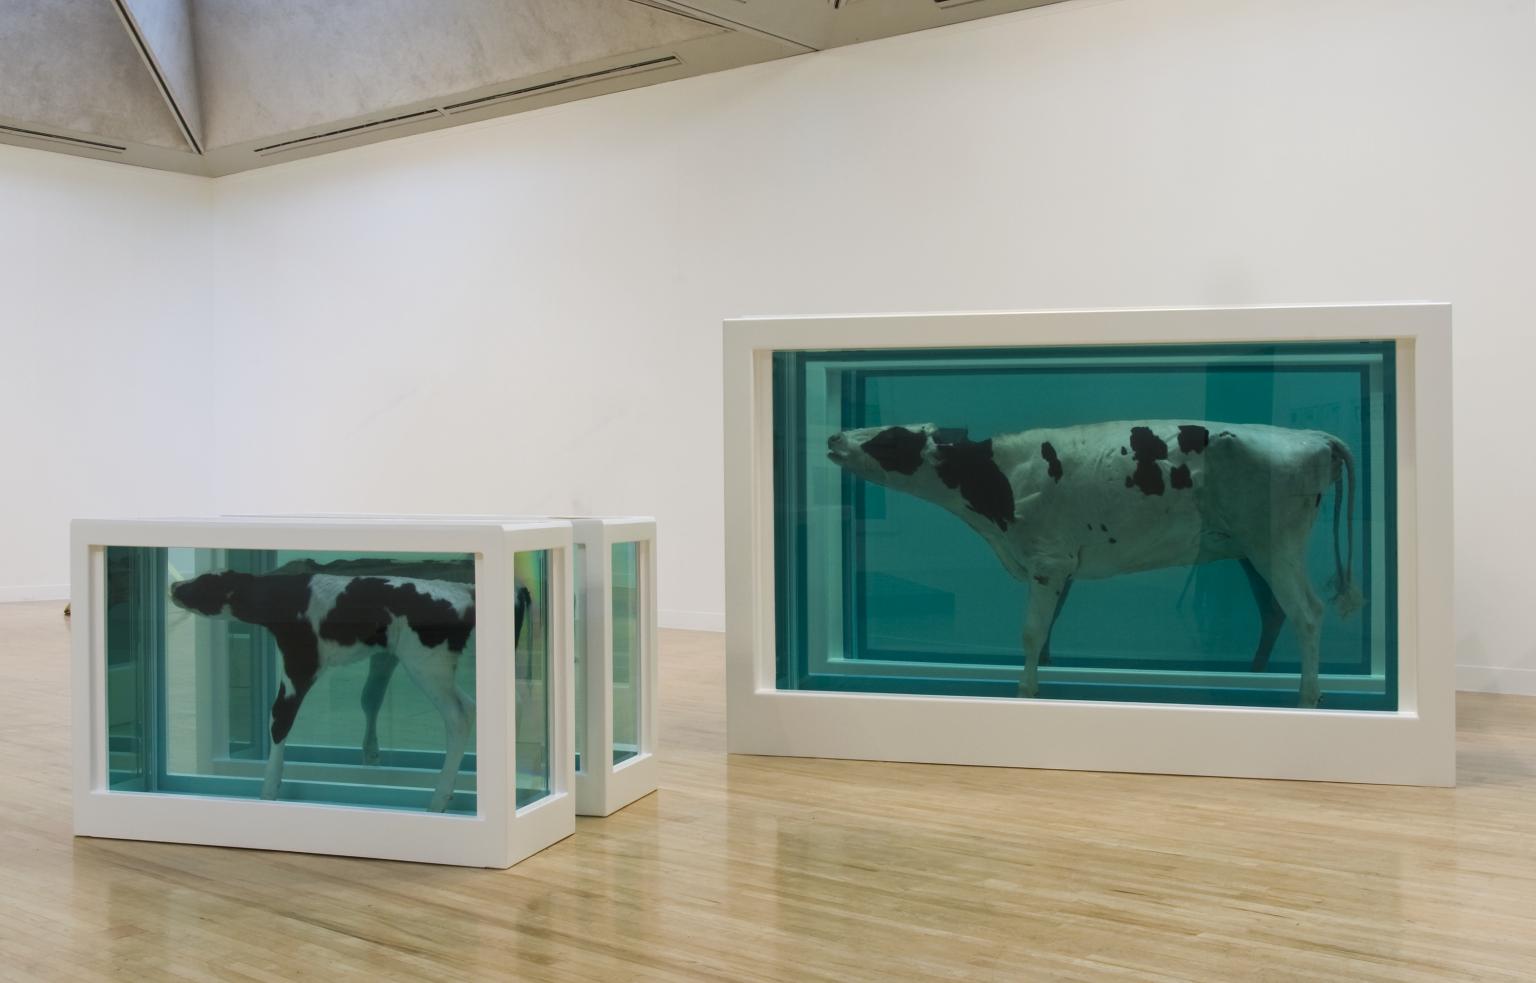 Damien Hirst, Mother and Child (Divided) from the Natural History series, 1993,  Photographed by Prudence Cuming Associates © Damien Hirst and Science Ltd, currently on display at Astrup Fearnley Museet, Oslo, Norway.